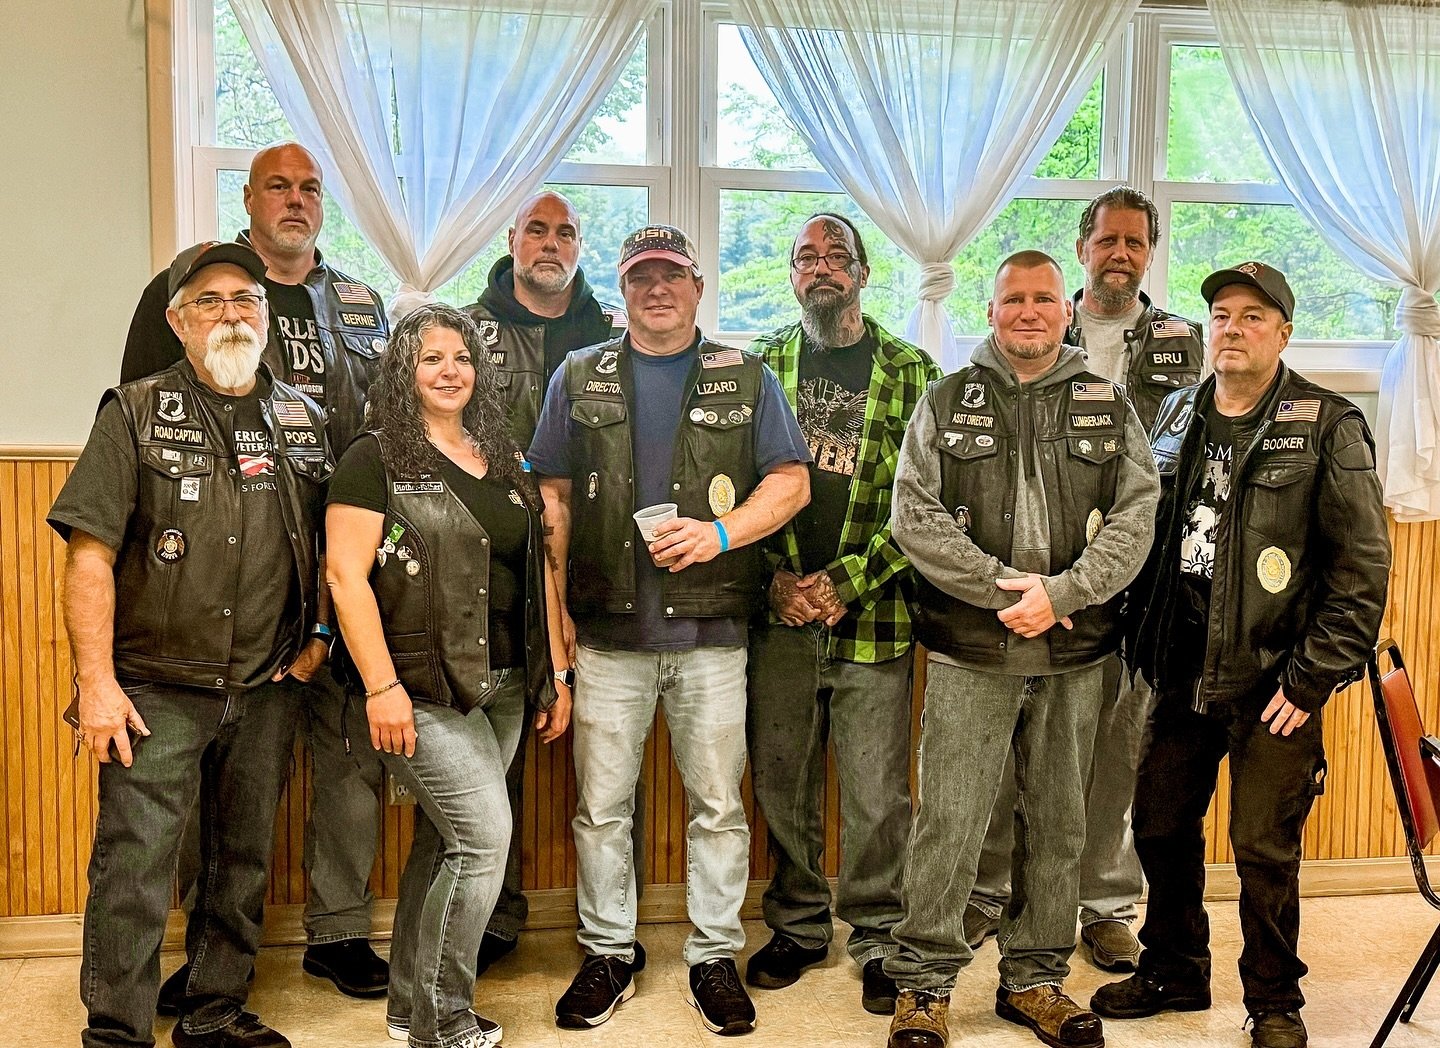 We want to show our deepest gratitude to Don (Pops), Tattoo Tony @undermyskintat2, all the Legion and Elk Riders (Post 65) and everyone who helped make this amazing fundraising BBQ event possible this past weekend. We can&rsquo;t thank you all enough